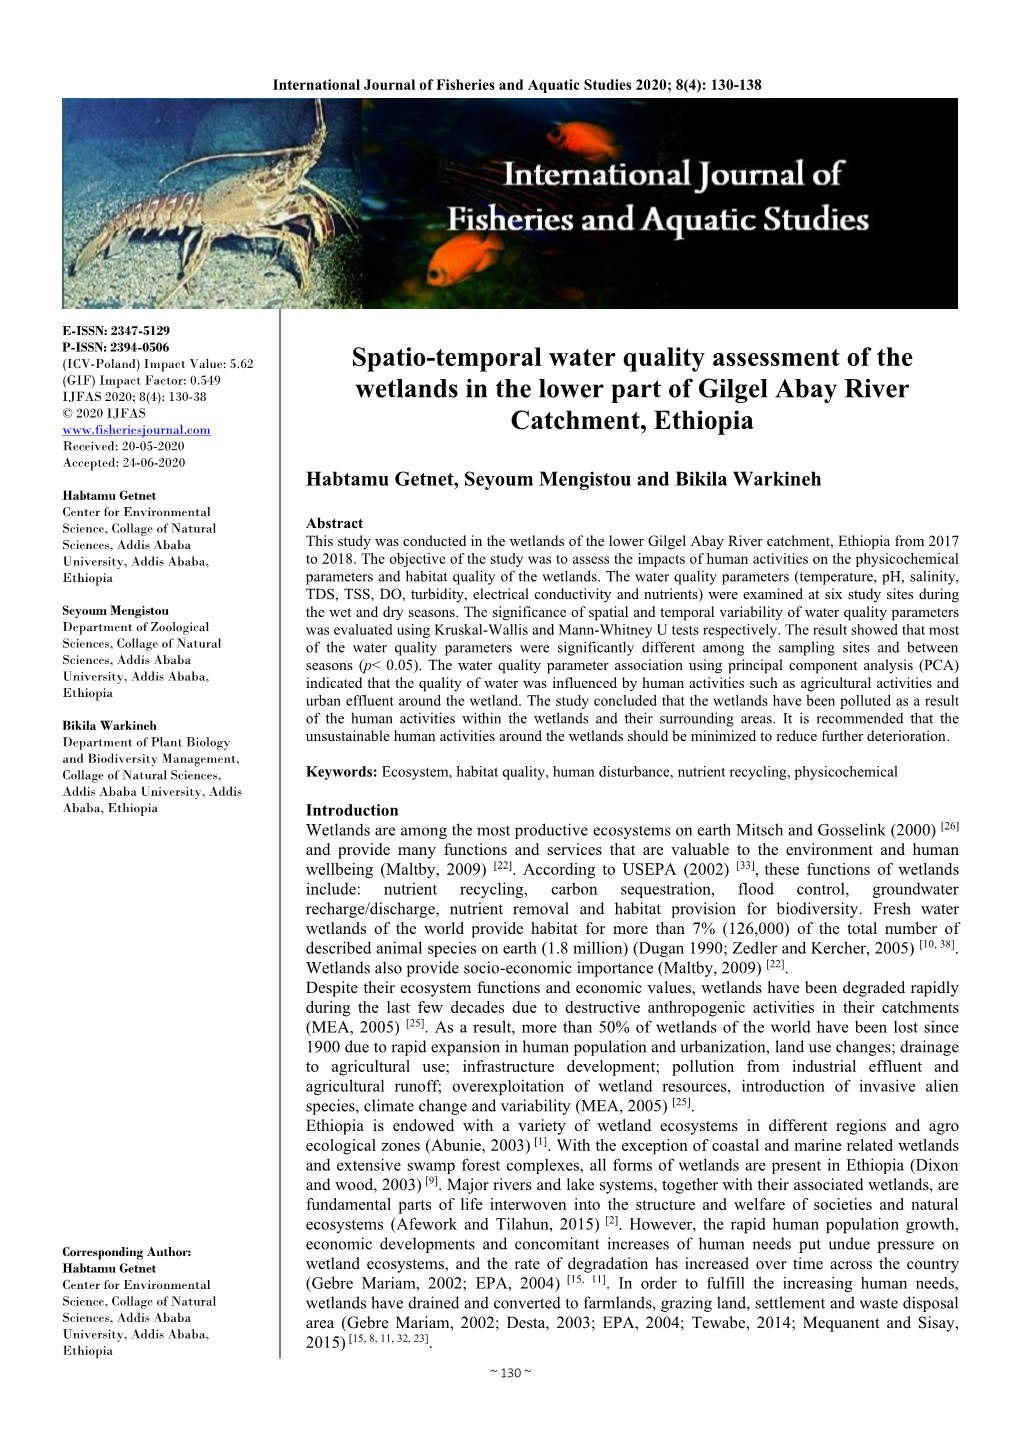 Spatio-Temporal Water Quality Assessment of the Wetlands in The